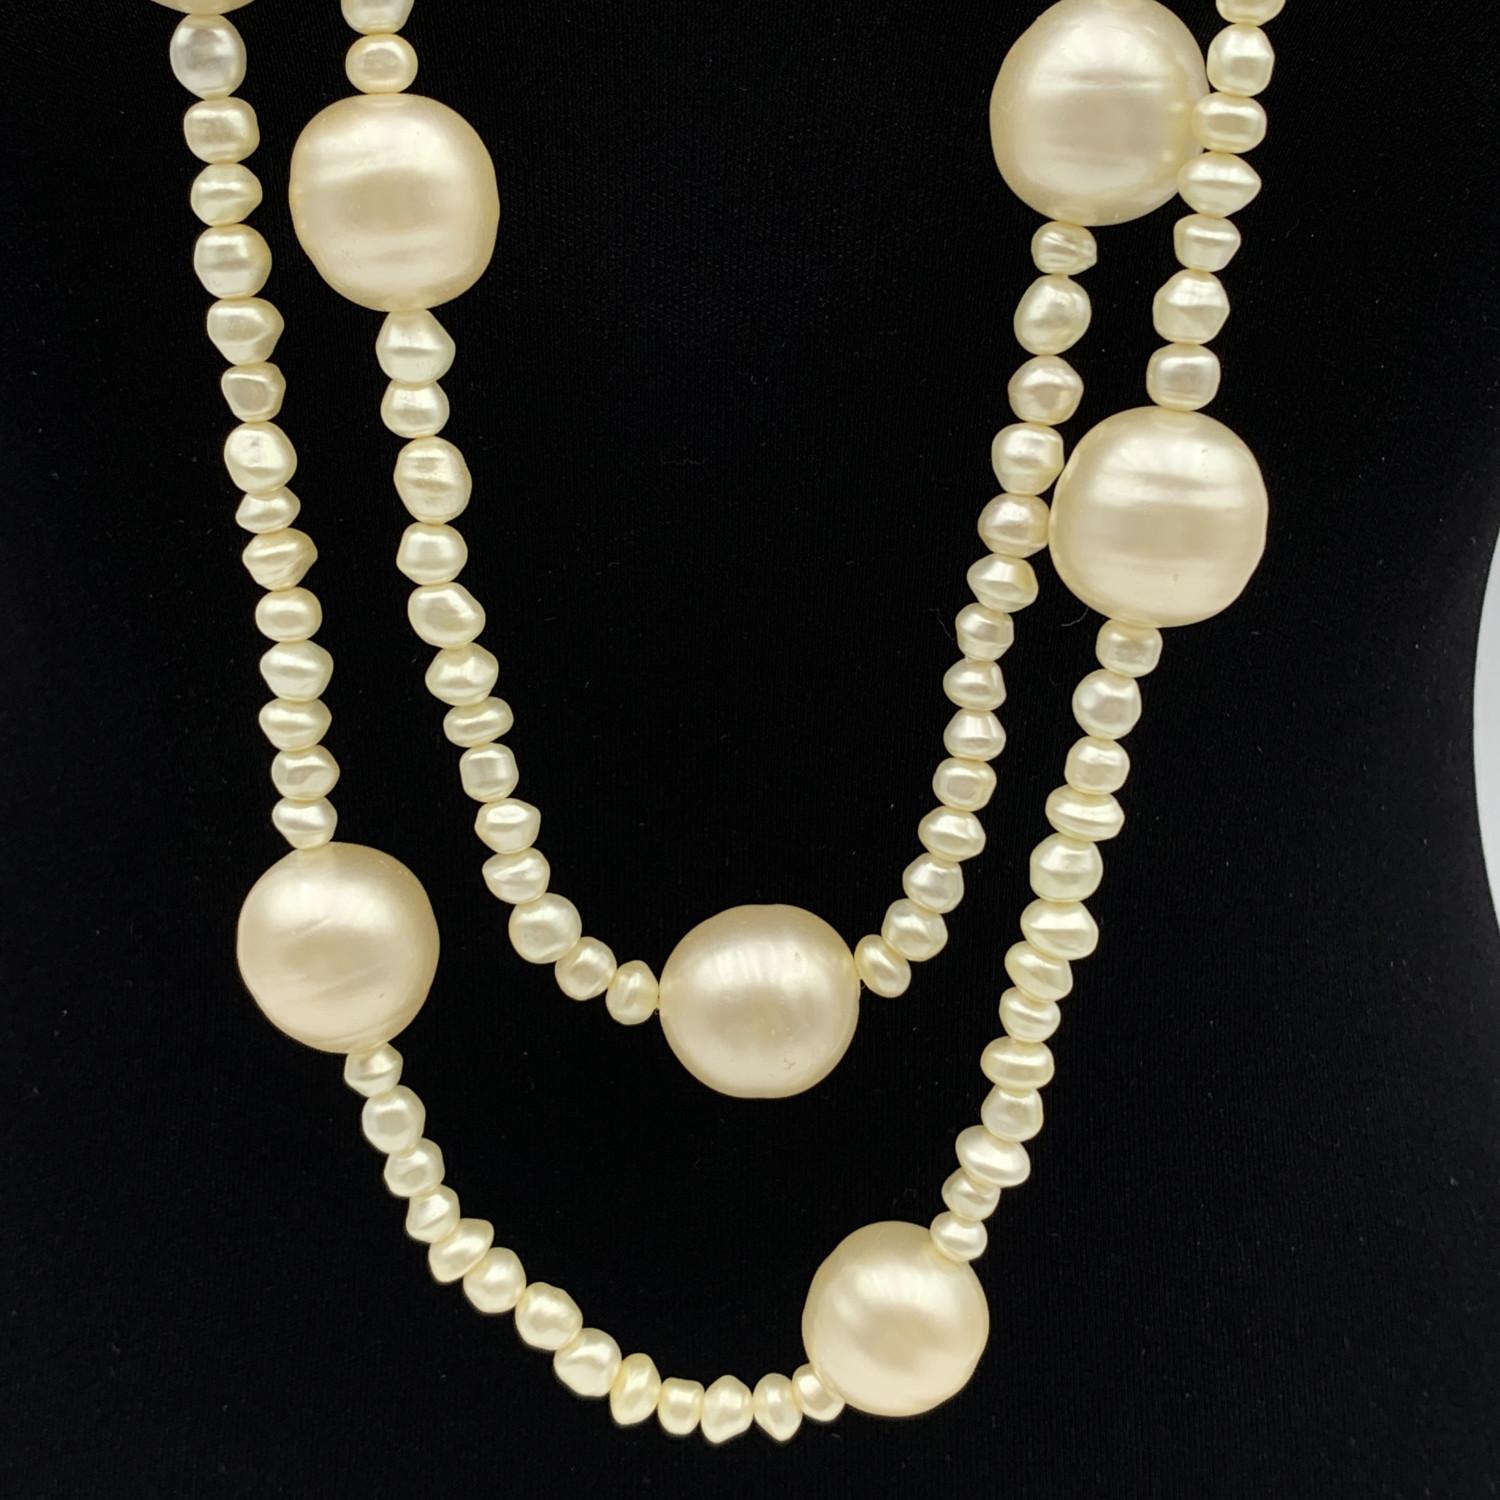 Beautiful vintage Chanel necklace by Karl Lagerfeld and Victoire de Castellane from the Ready-to-Wear Fall / Winter 1991-1992 Collection. Very long design with white baroque faux pearls, interspersed with larger pearls.  'CHANEL 2 CC 6 - Made in